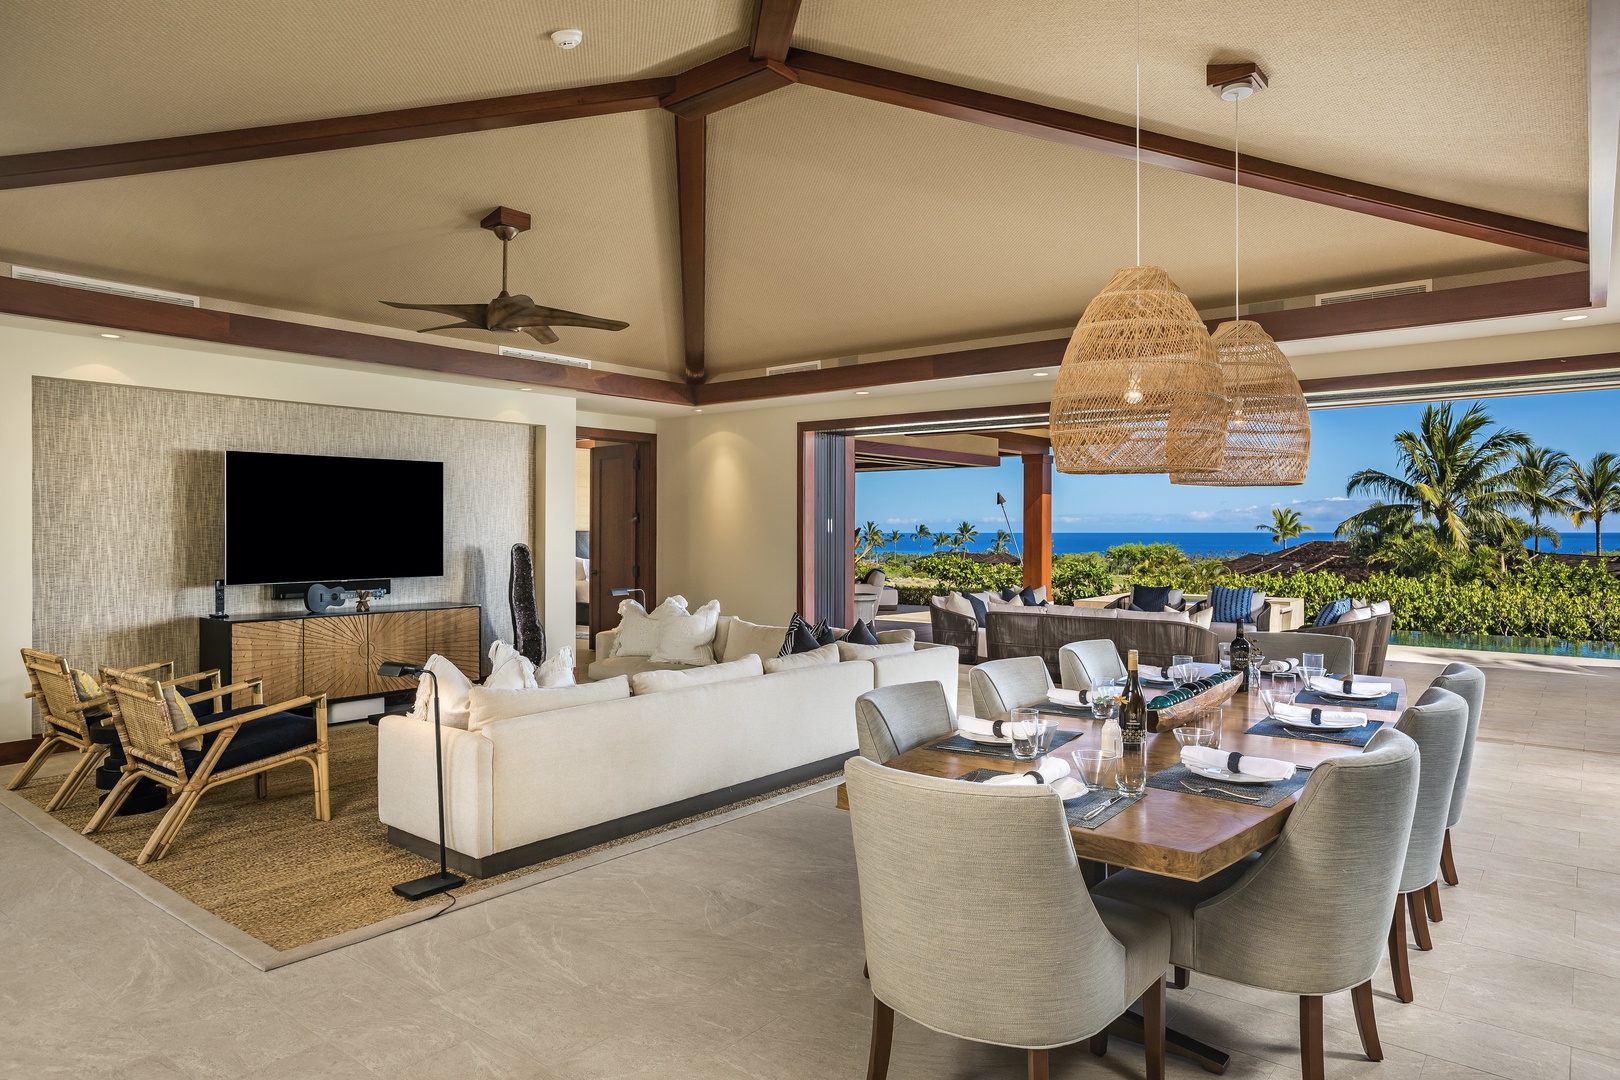 Kailua Kona Vacation Rentals, 4BD Kulanakauhale (3558) Estate Home at Four Seasons Resort at Hualalai - Vaulted ceilings with mahogany trim and cove lighting and an elegant formal dining table for eight.